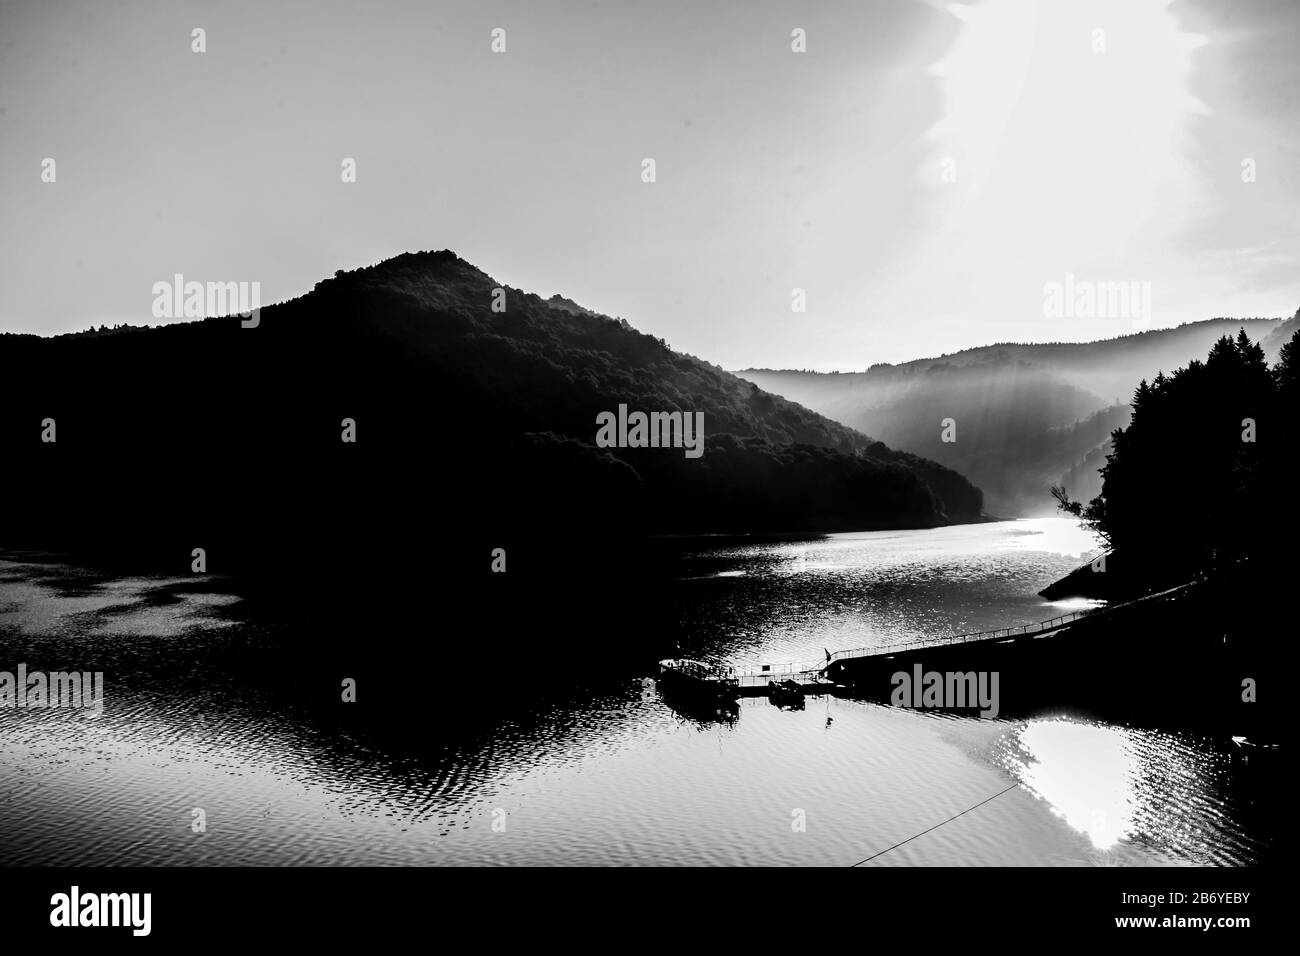 Black and white composition of sun rising over misty lake with mountain forest in the background and boat at the pier in the foreground Stock Photo